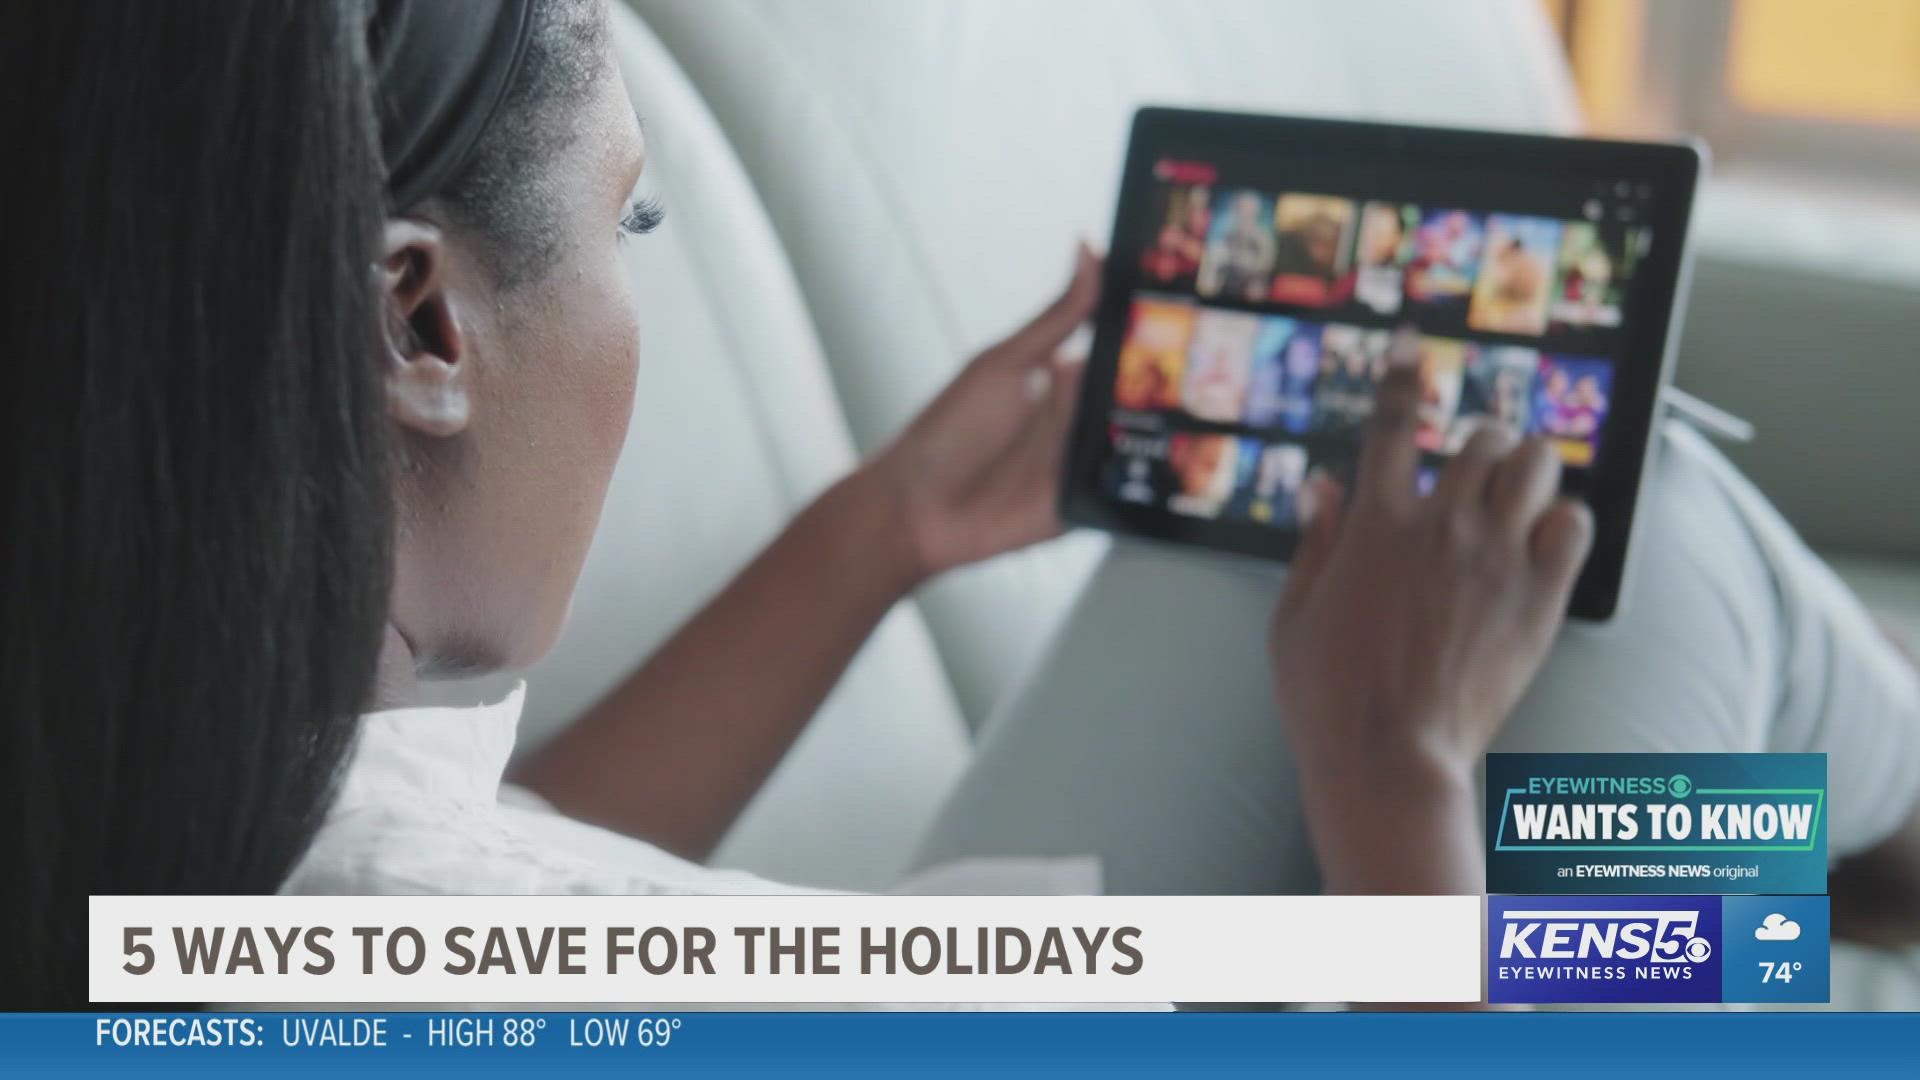 Avoid holiday debt you will be paying for all of 2022. KENS 5 has five easy, pain-free ways to save about $60 a week for your holiday budget.